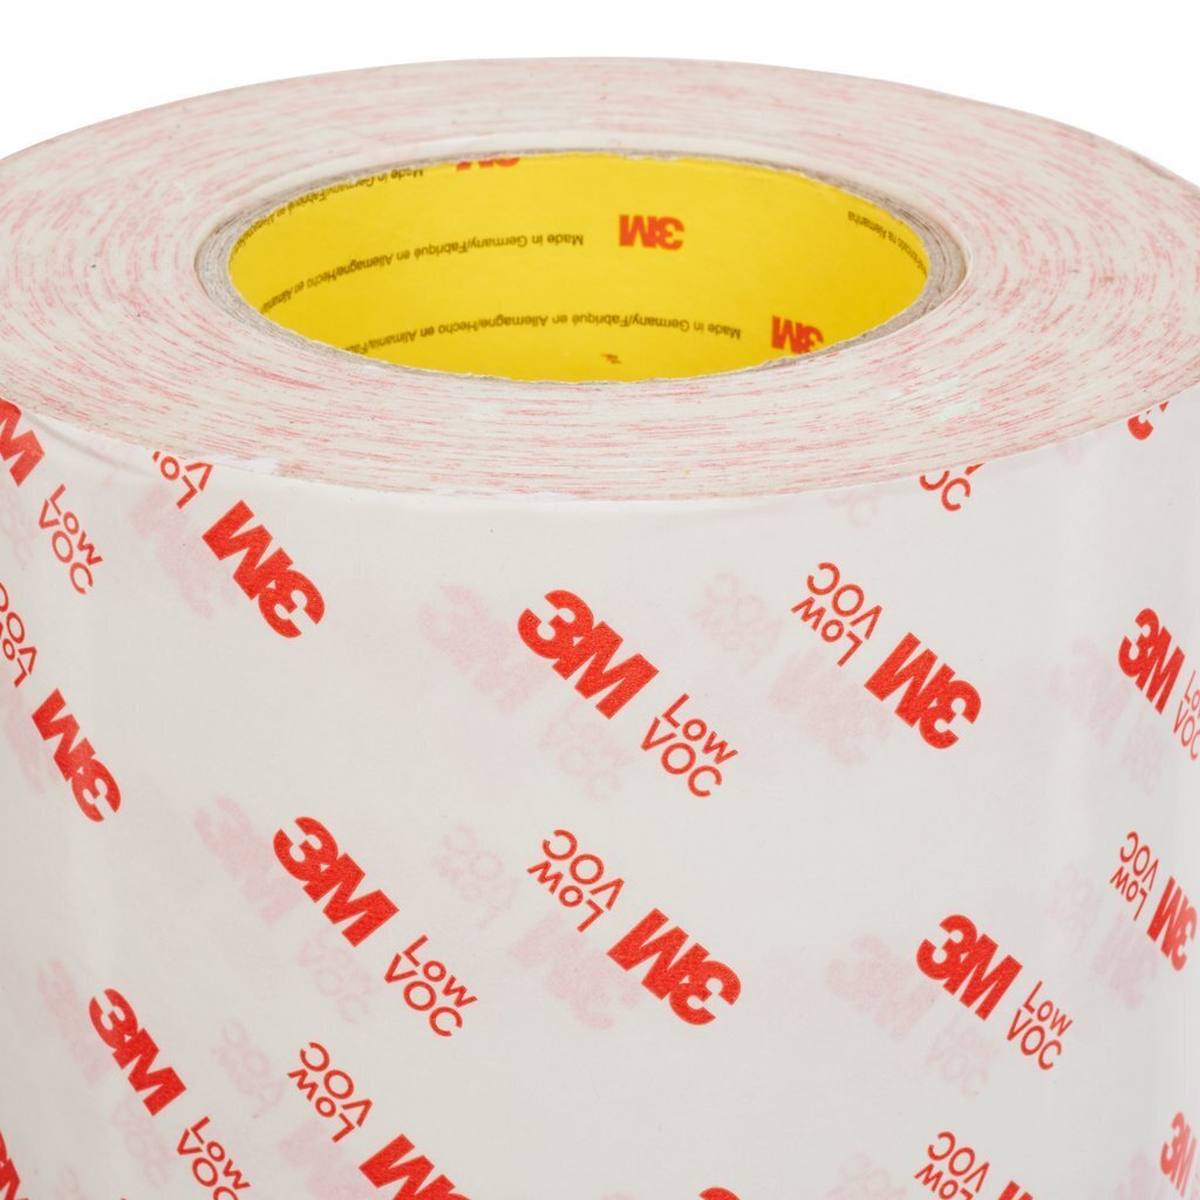 3M Double-sided adhesive tape with non-woven paper backing 99015LVC, white, 1000 mm x 50 m, 0.15 mm